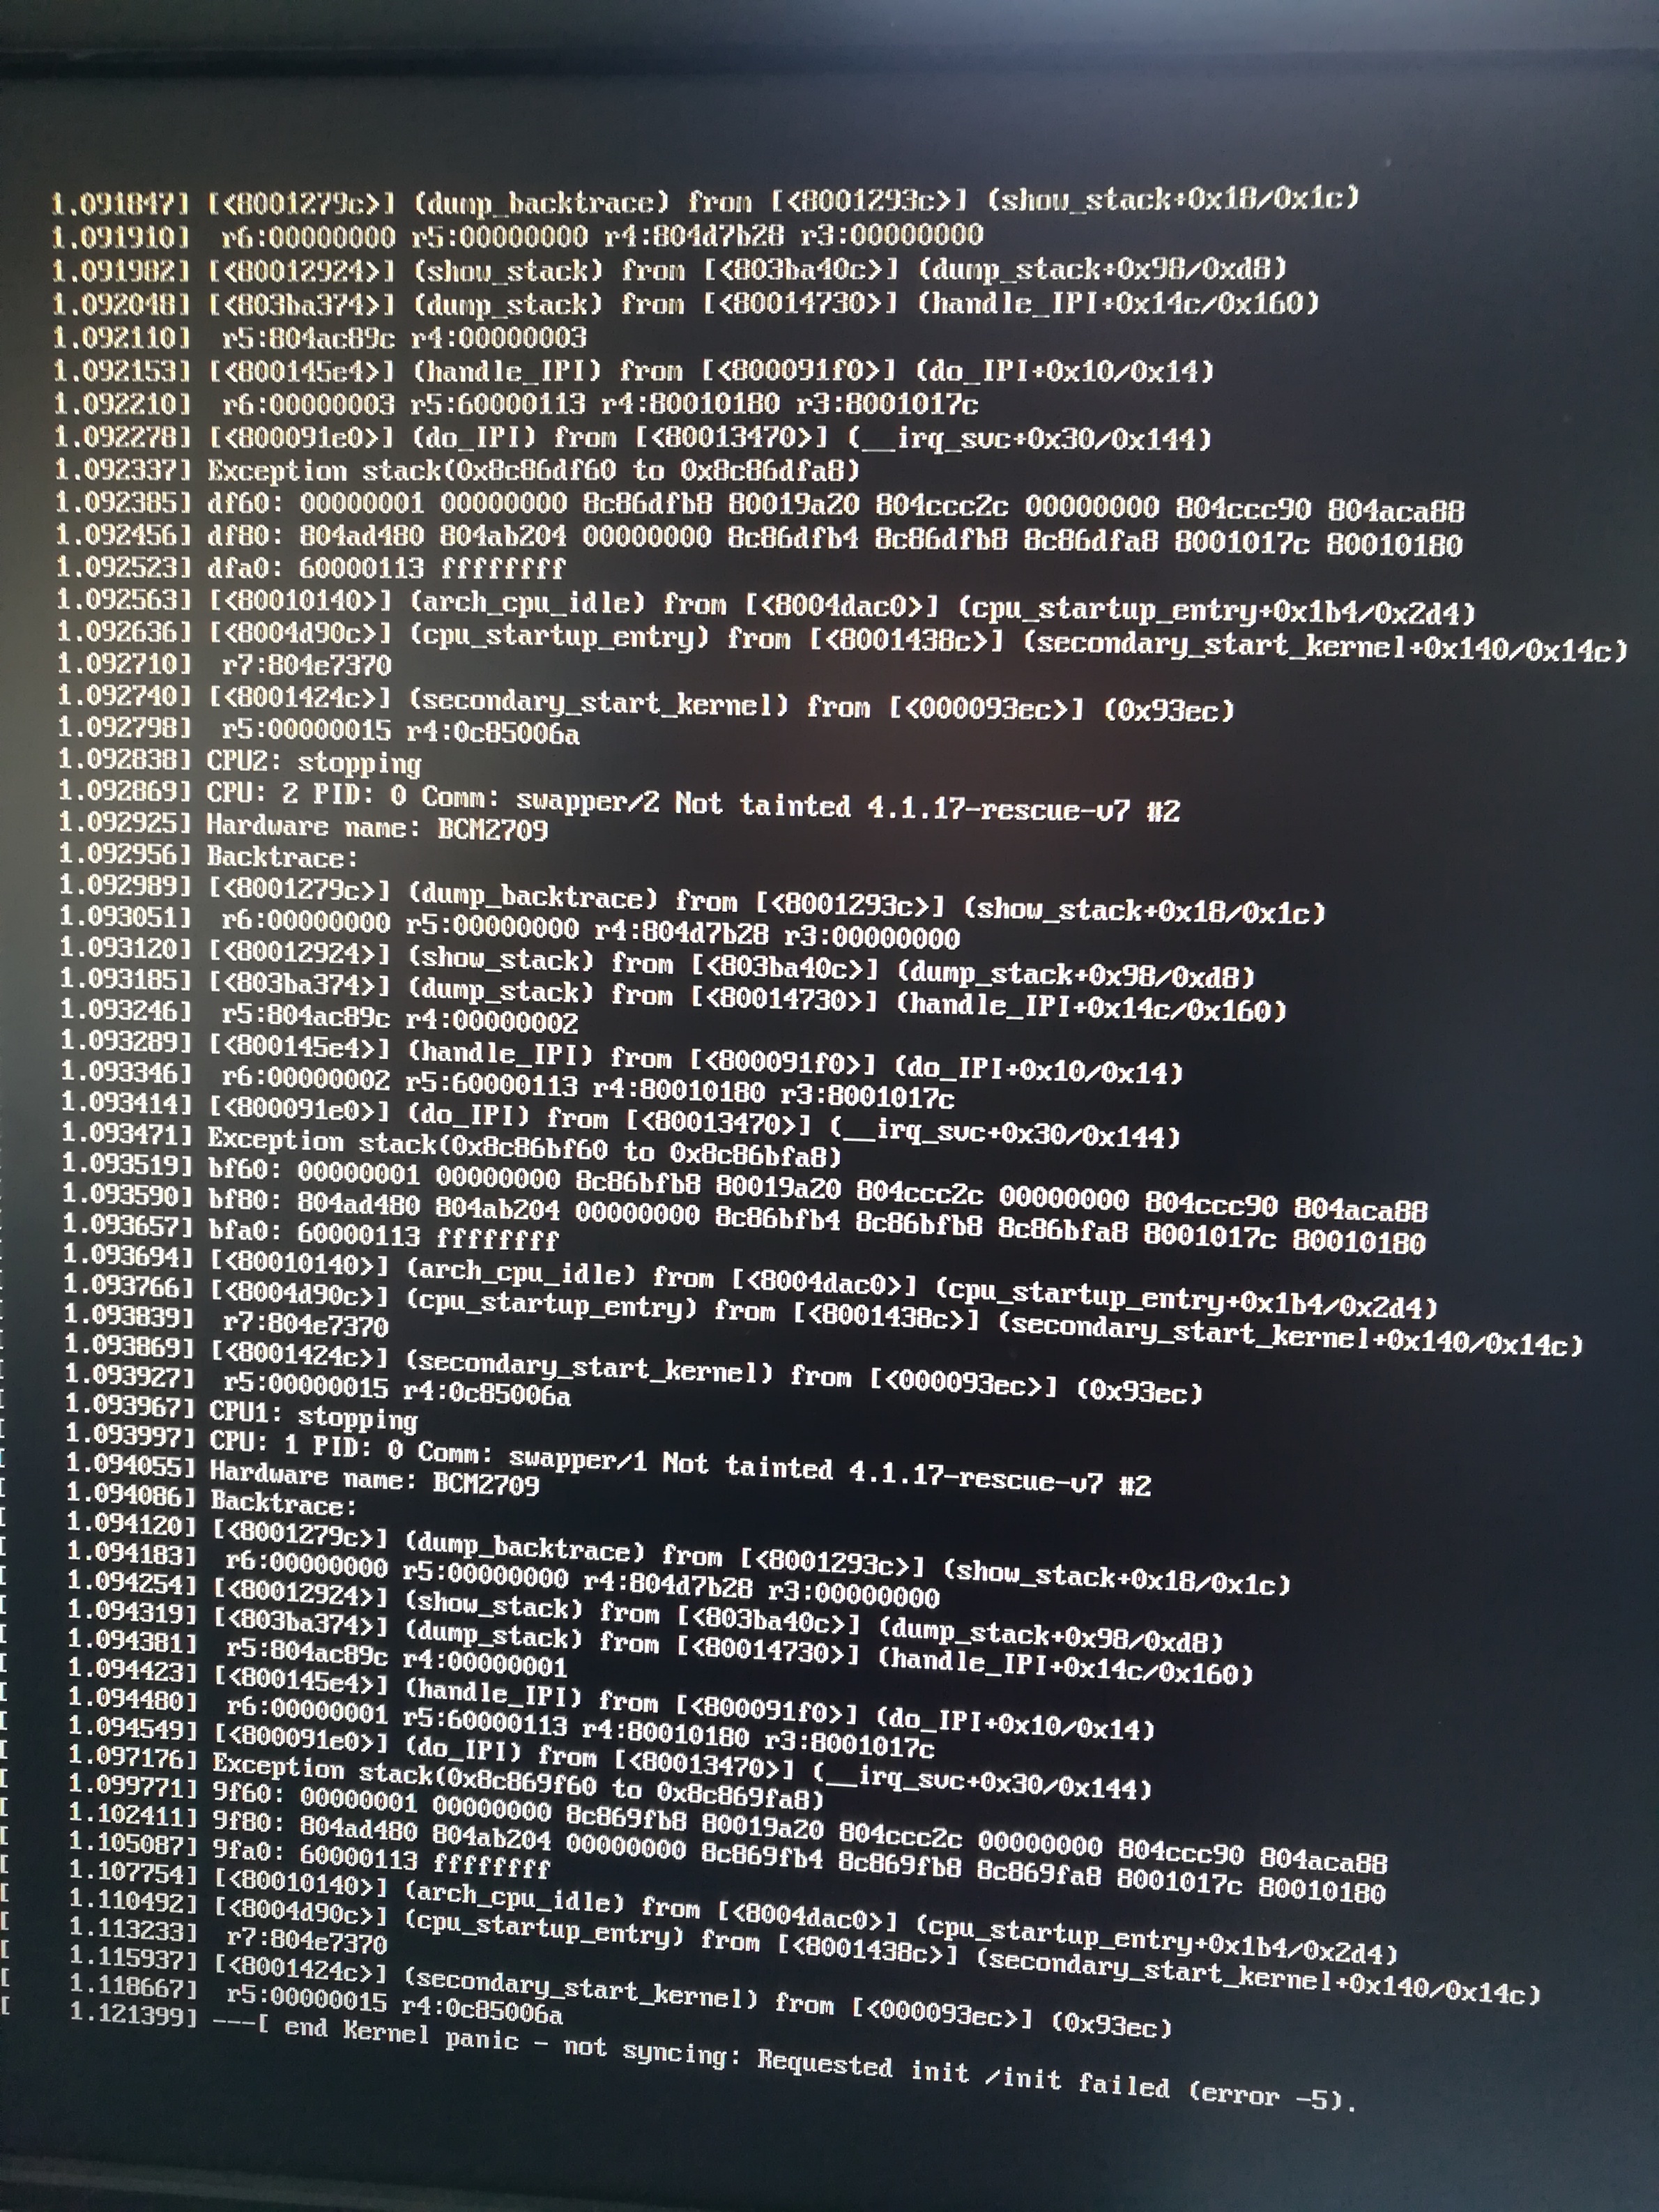 End Kernel Panic - Not Syncing - Requested init /init failed ...